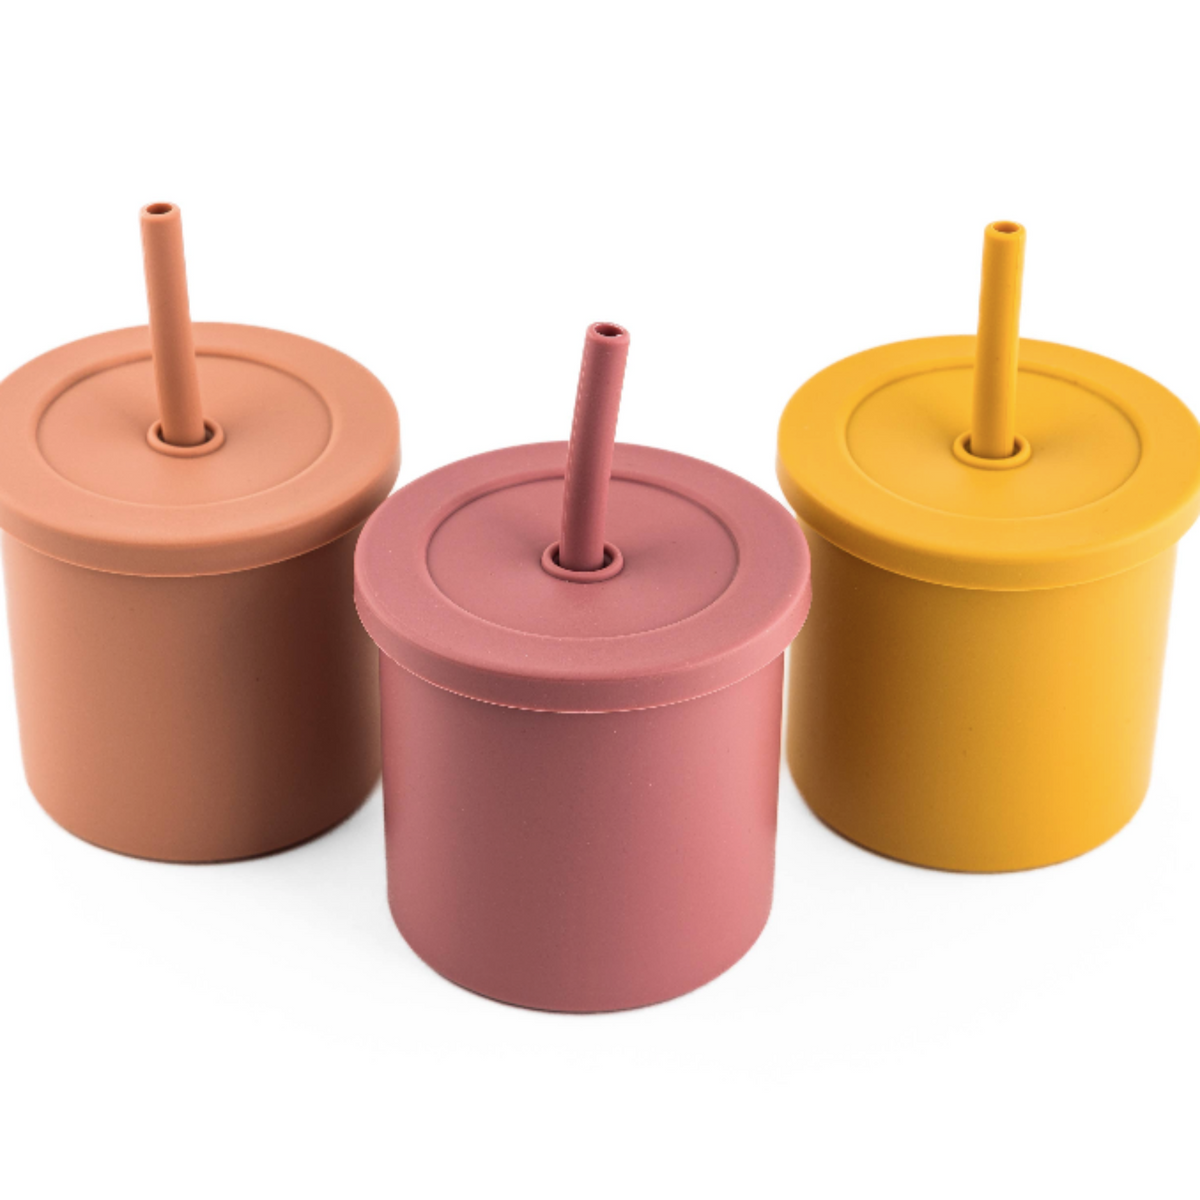 2 in 1 Straw Cup and Snack Container - Warm Tones: Orange